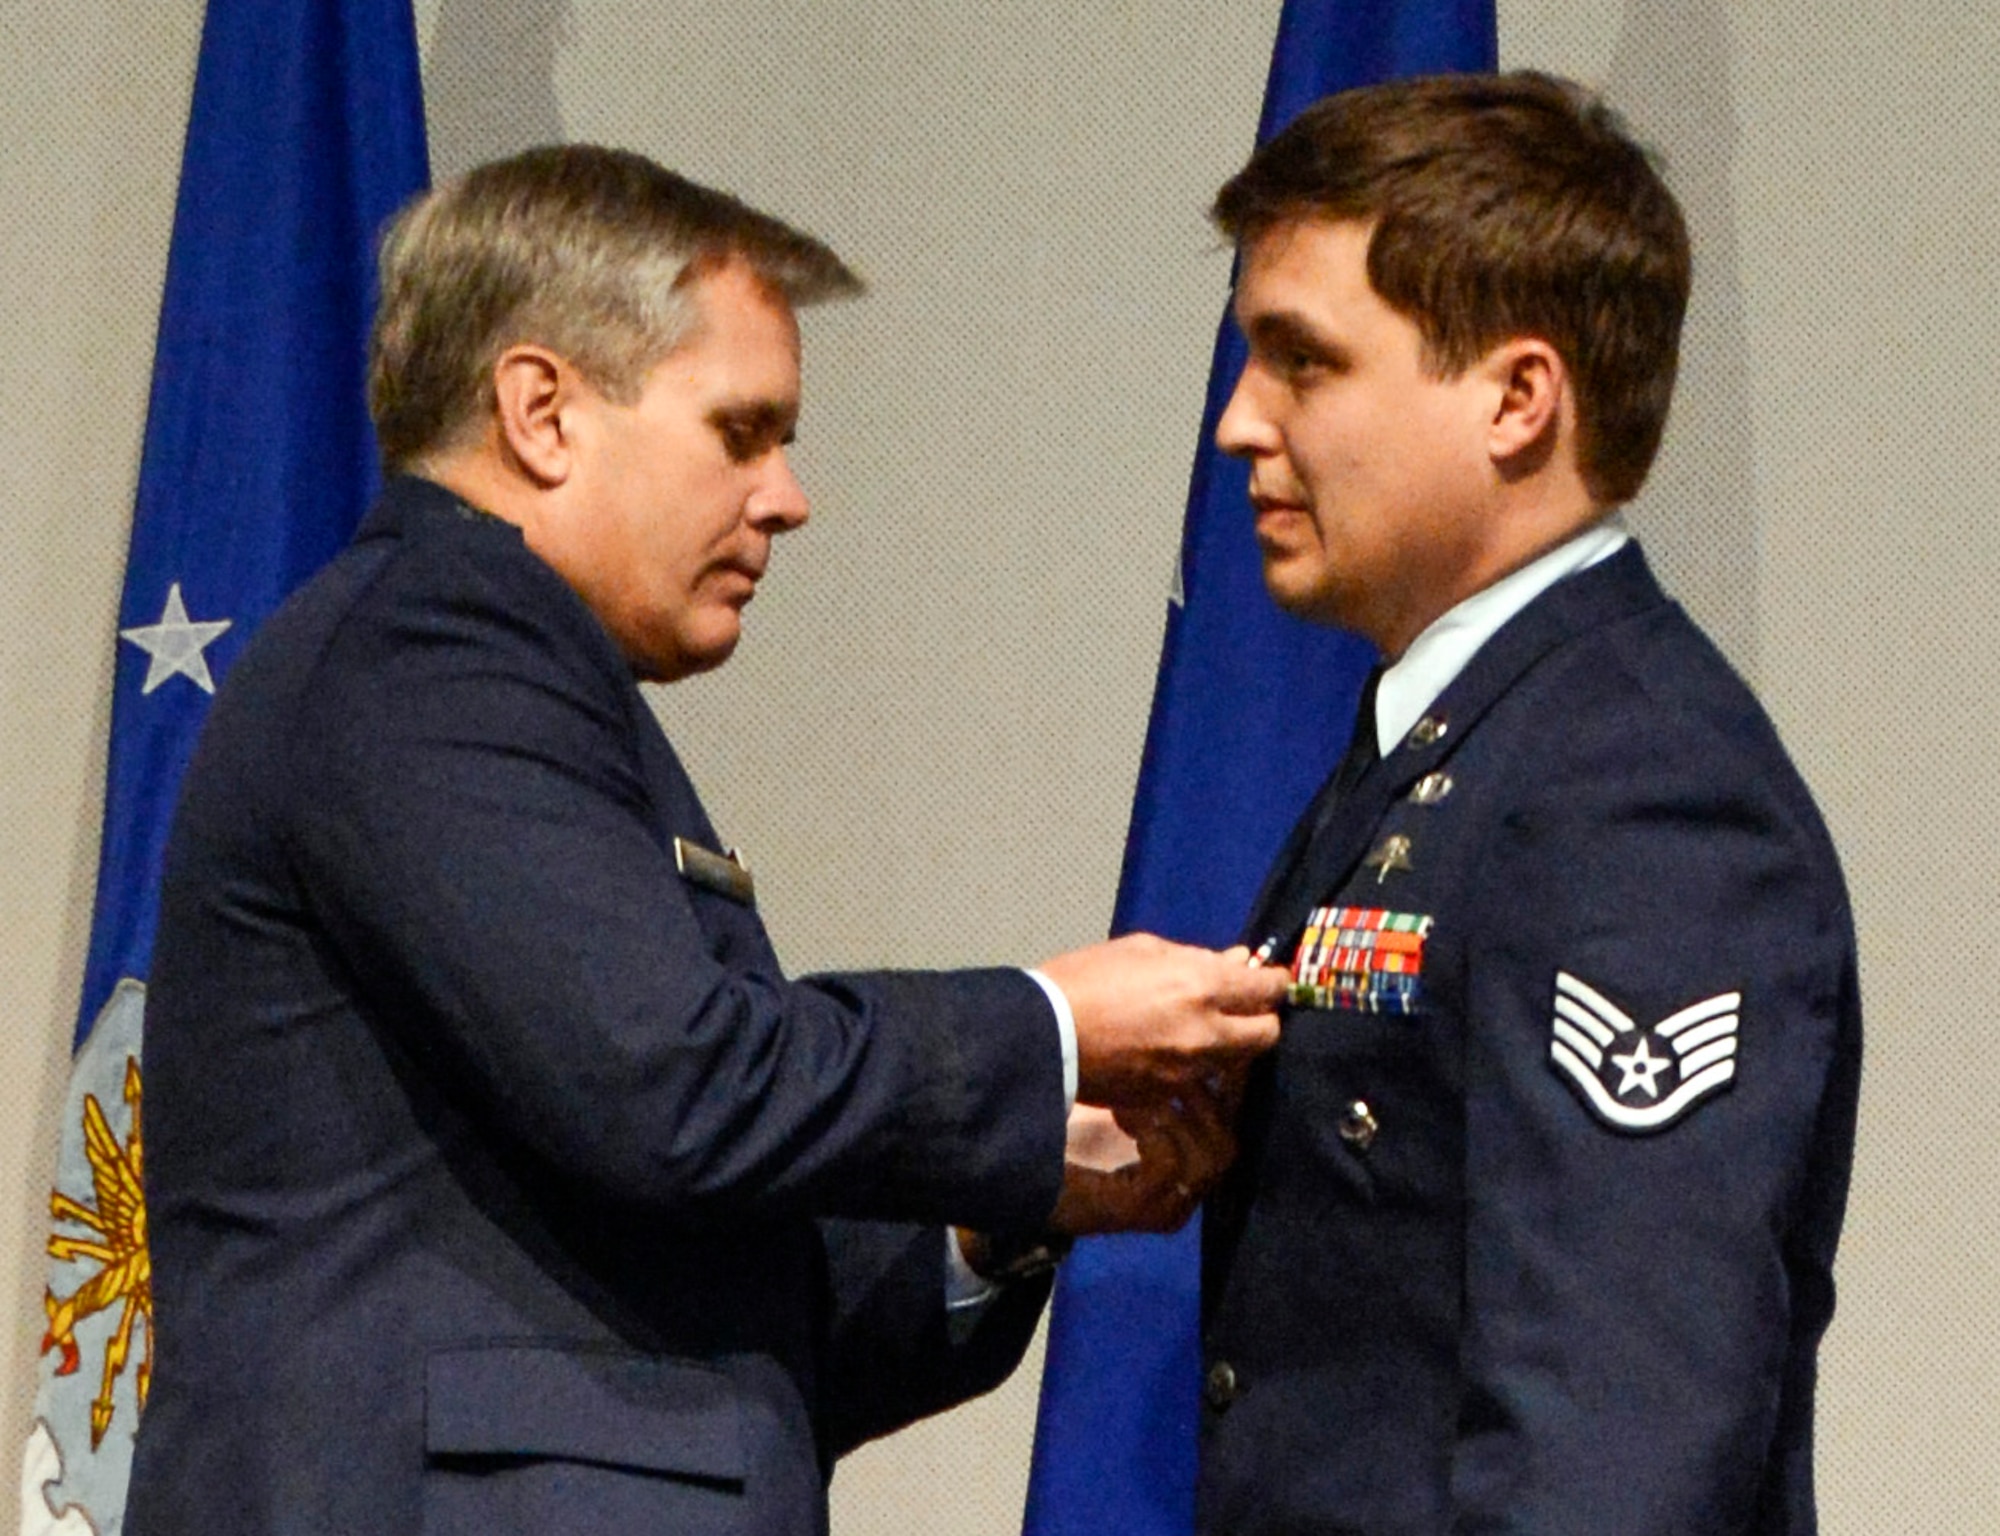 Lt. Gen. Eric E. Fiel, Air Force Special Operations Command commander, pins the Silver Star Medal onto Staff Sgt. Adam Krueger, 22nd Special Tactics Squadron combat controller, Jan. 24, 2013, at a ceremony at Joint Base Lewis-McChord, Wash. Krueger was awarded the medal for displaying gallantry in action against an armed enemy of the United States, risking his life in order to direct life-saving air support, as well as exposing himself in order to direct a medical evacuation helicopter to the scene, during a 12-hour firefight in Afghanistan in 2010. (U.S. Air Force photo/Staff Sgt. Sean Tobin)